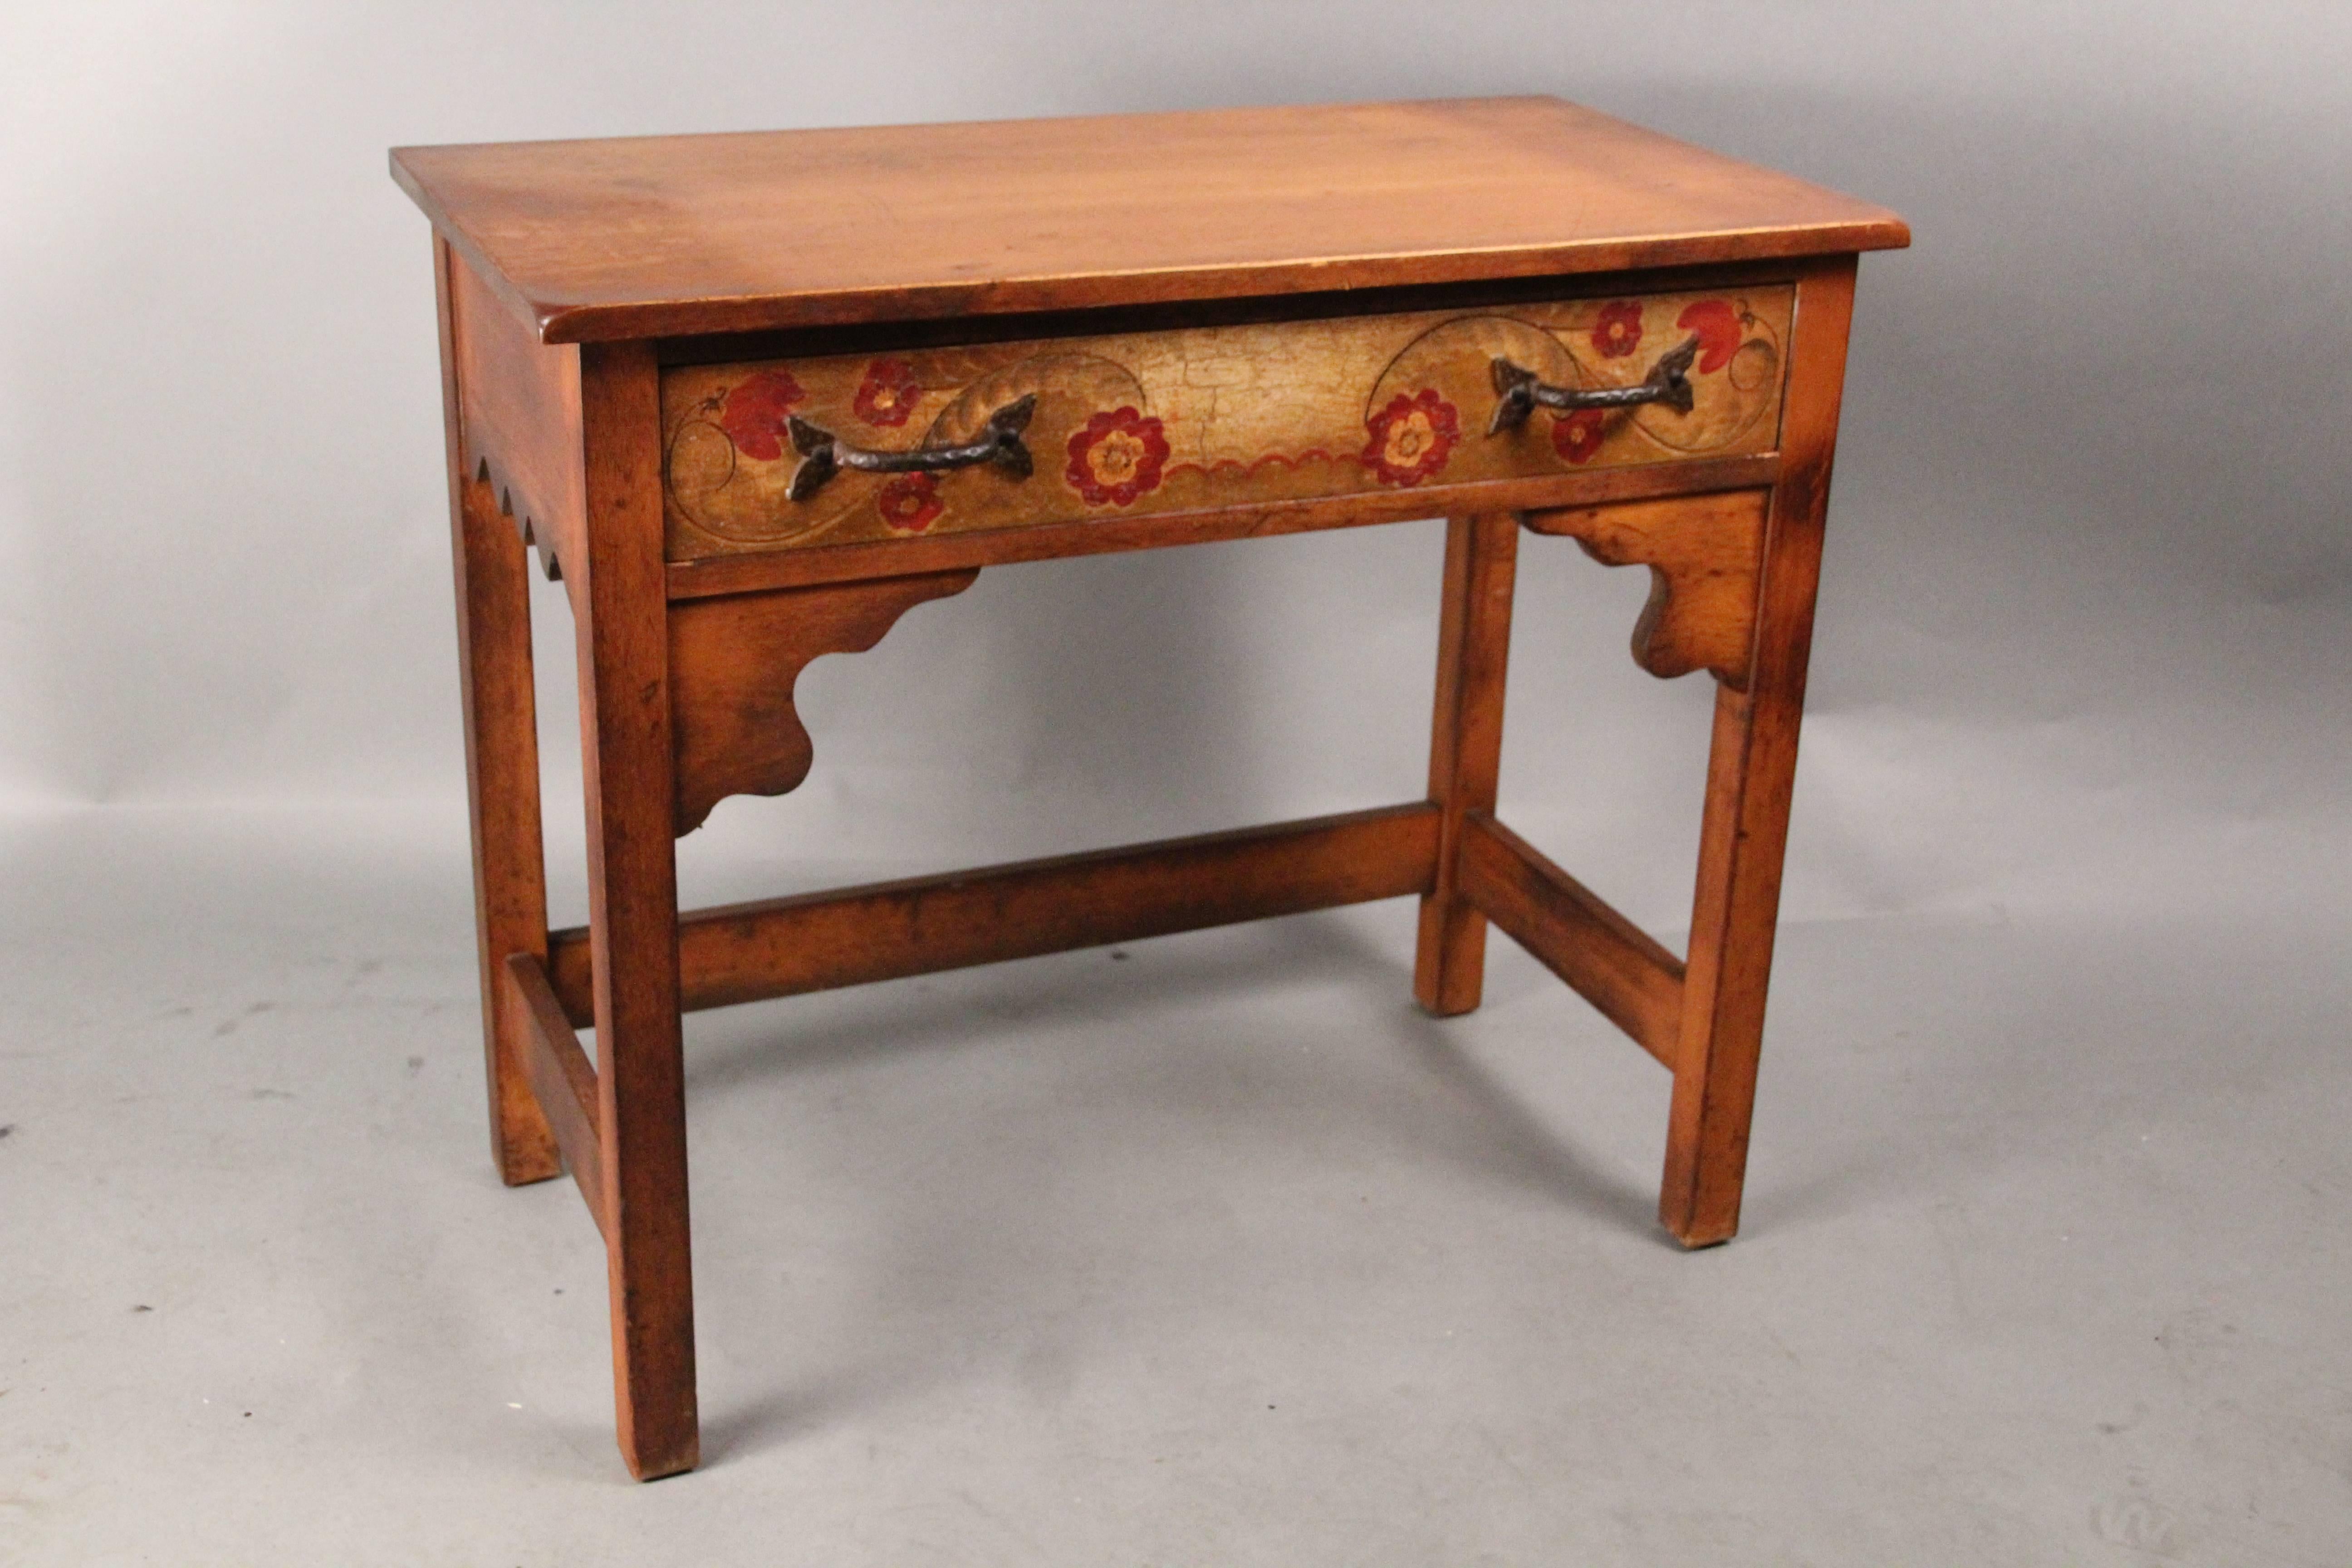 Monterey side table with one drawer, circa 1930s. Iron pull. Colorful hand-painted floral decoration.